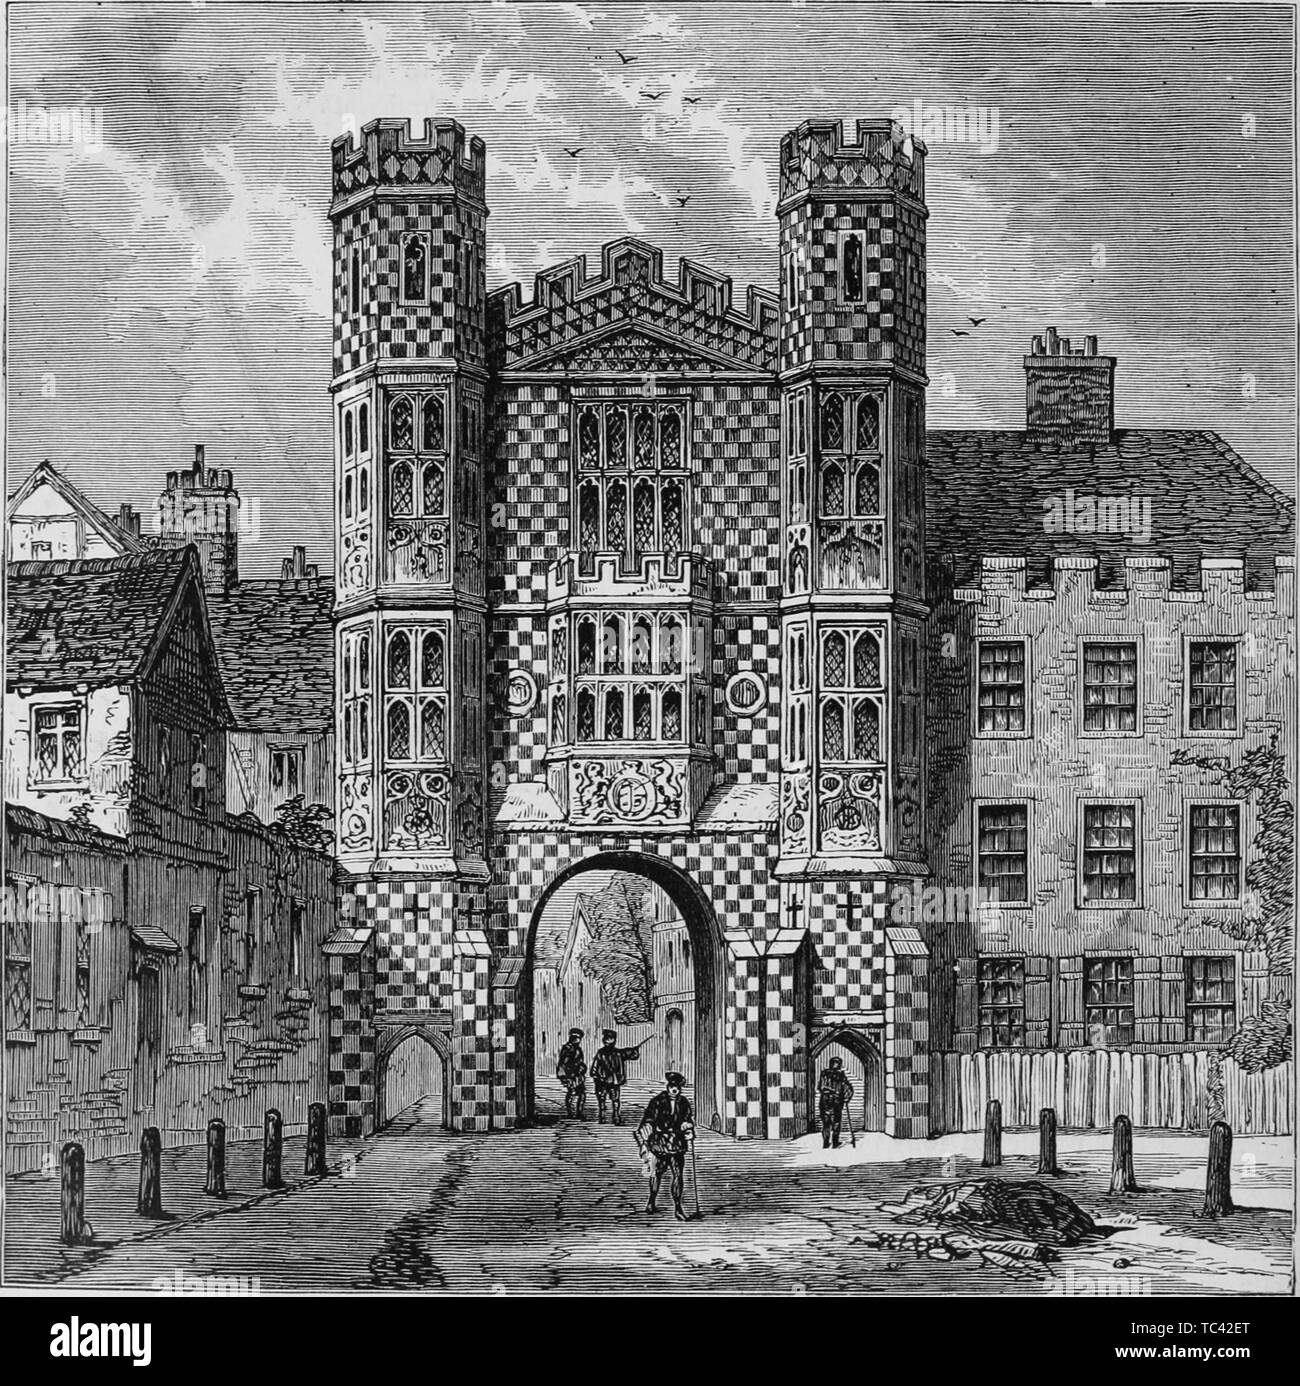 Engraving of the Holbein Gate at Whitehall, London, England, from the book 'Old and new London: a narrative of its history, its people, and its places' by Thornbury Walter, 1873. Courtesy Internet Archive. () Stock Photo